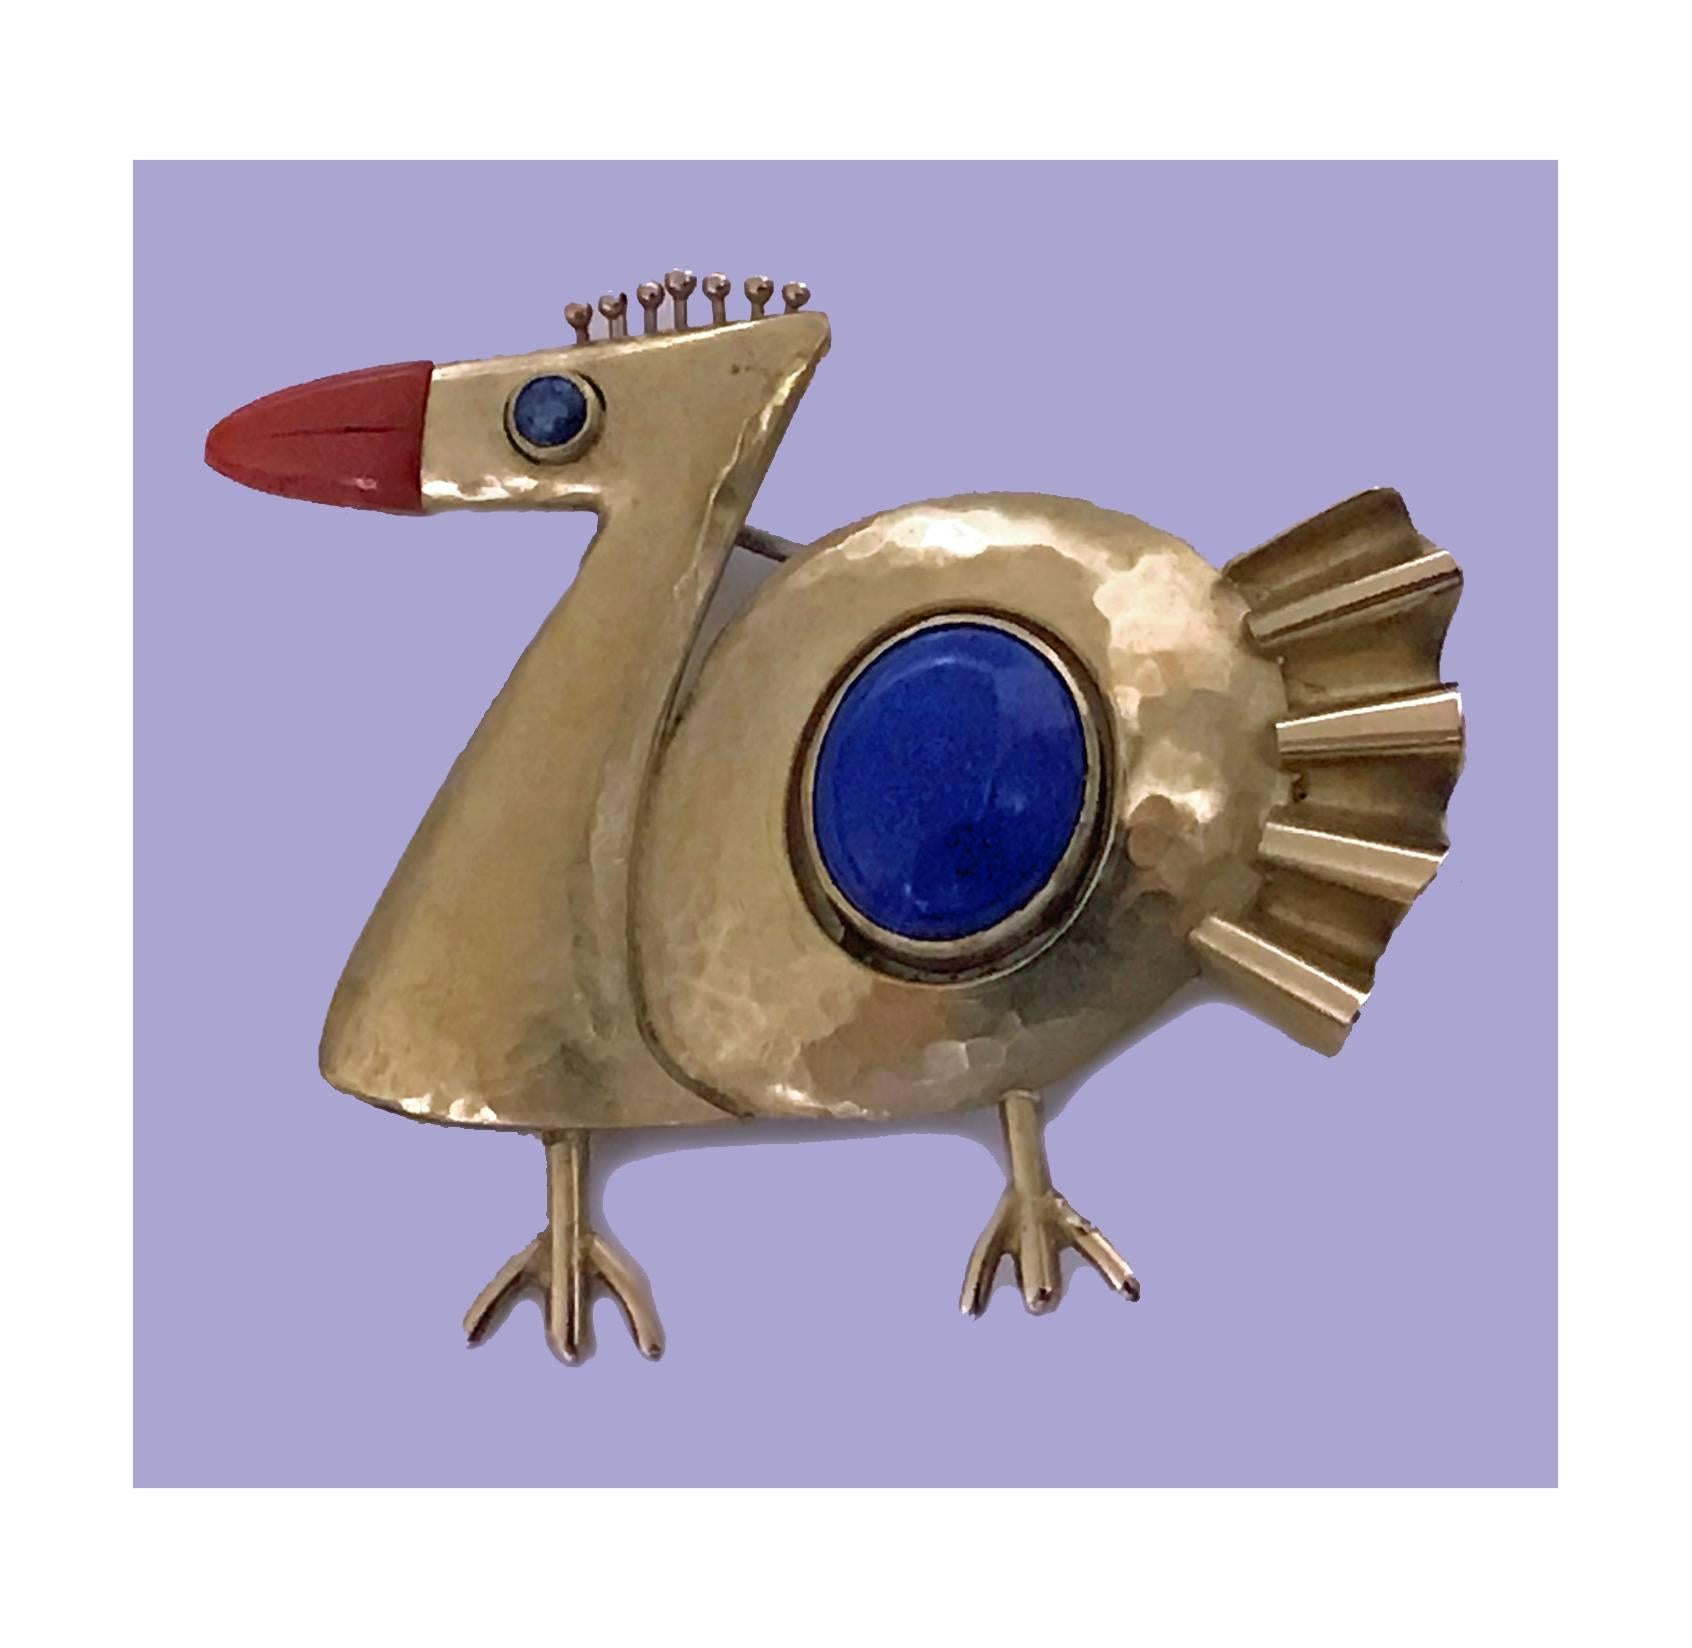 Walter Schluep 18-karat abstract bird Brooch Pin, 2003. Bezel set lapis body, sapphire eye and carnelian beak. Fully signed on reverse and engraved MH Dec 23 2003. Spanish born, Geneva trained, Schluep emigrated to Montreal, was renowned for